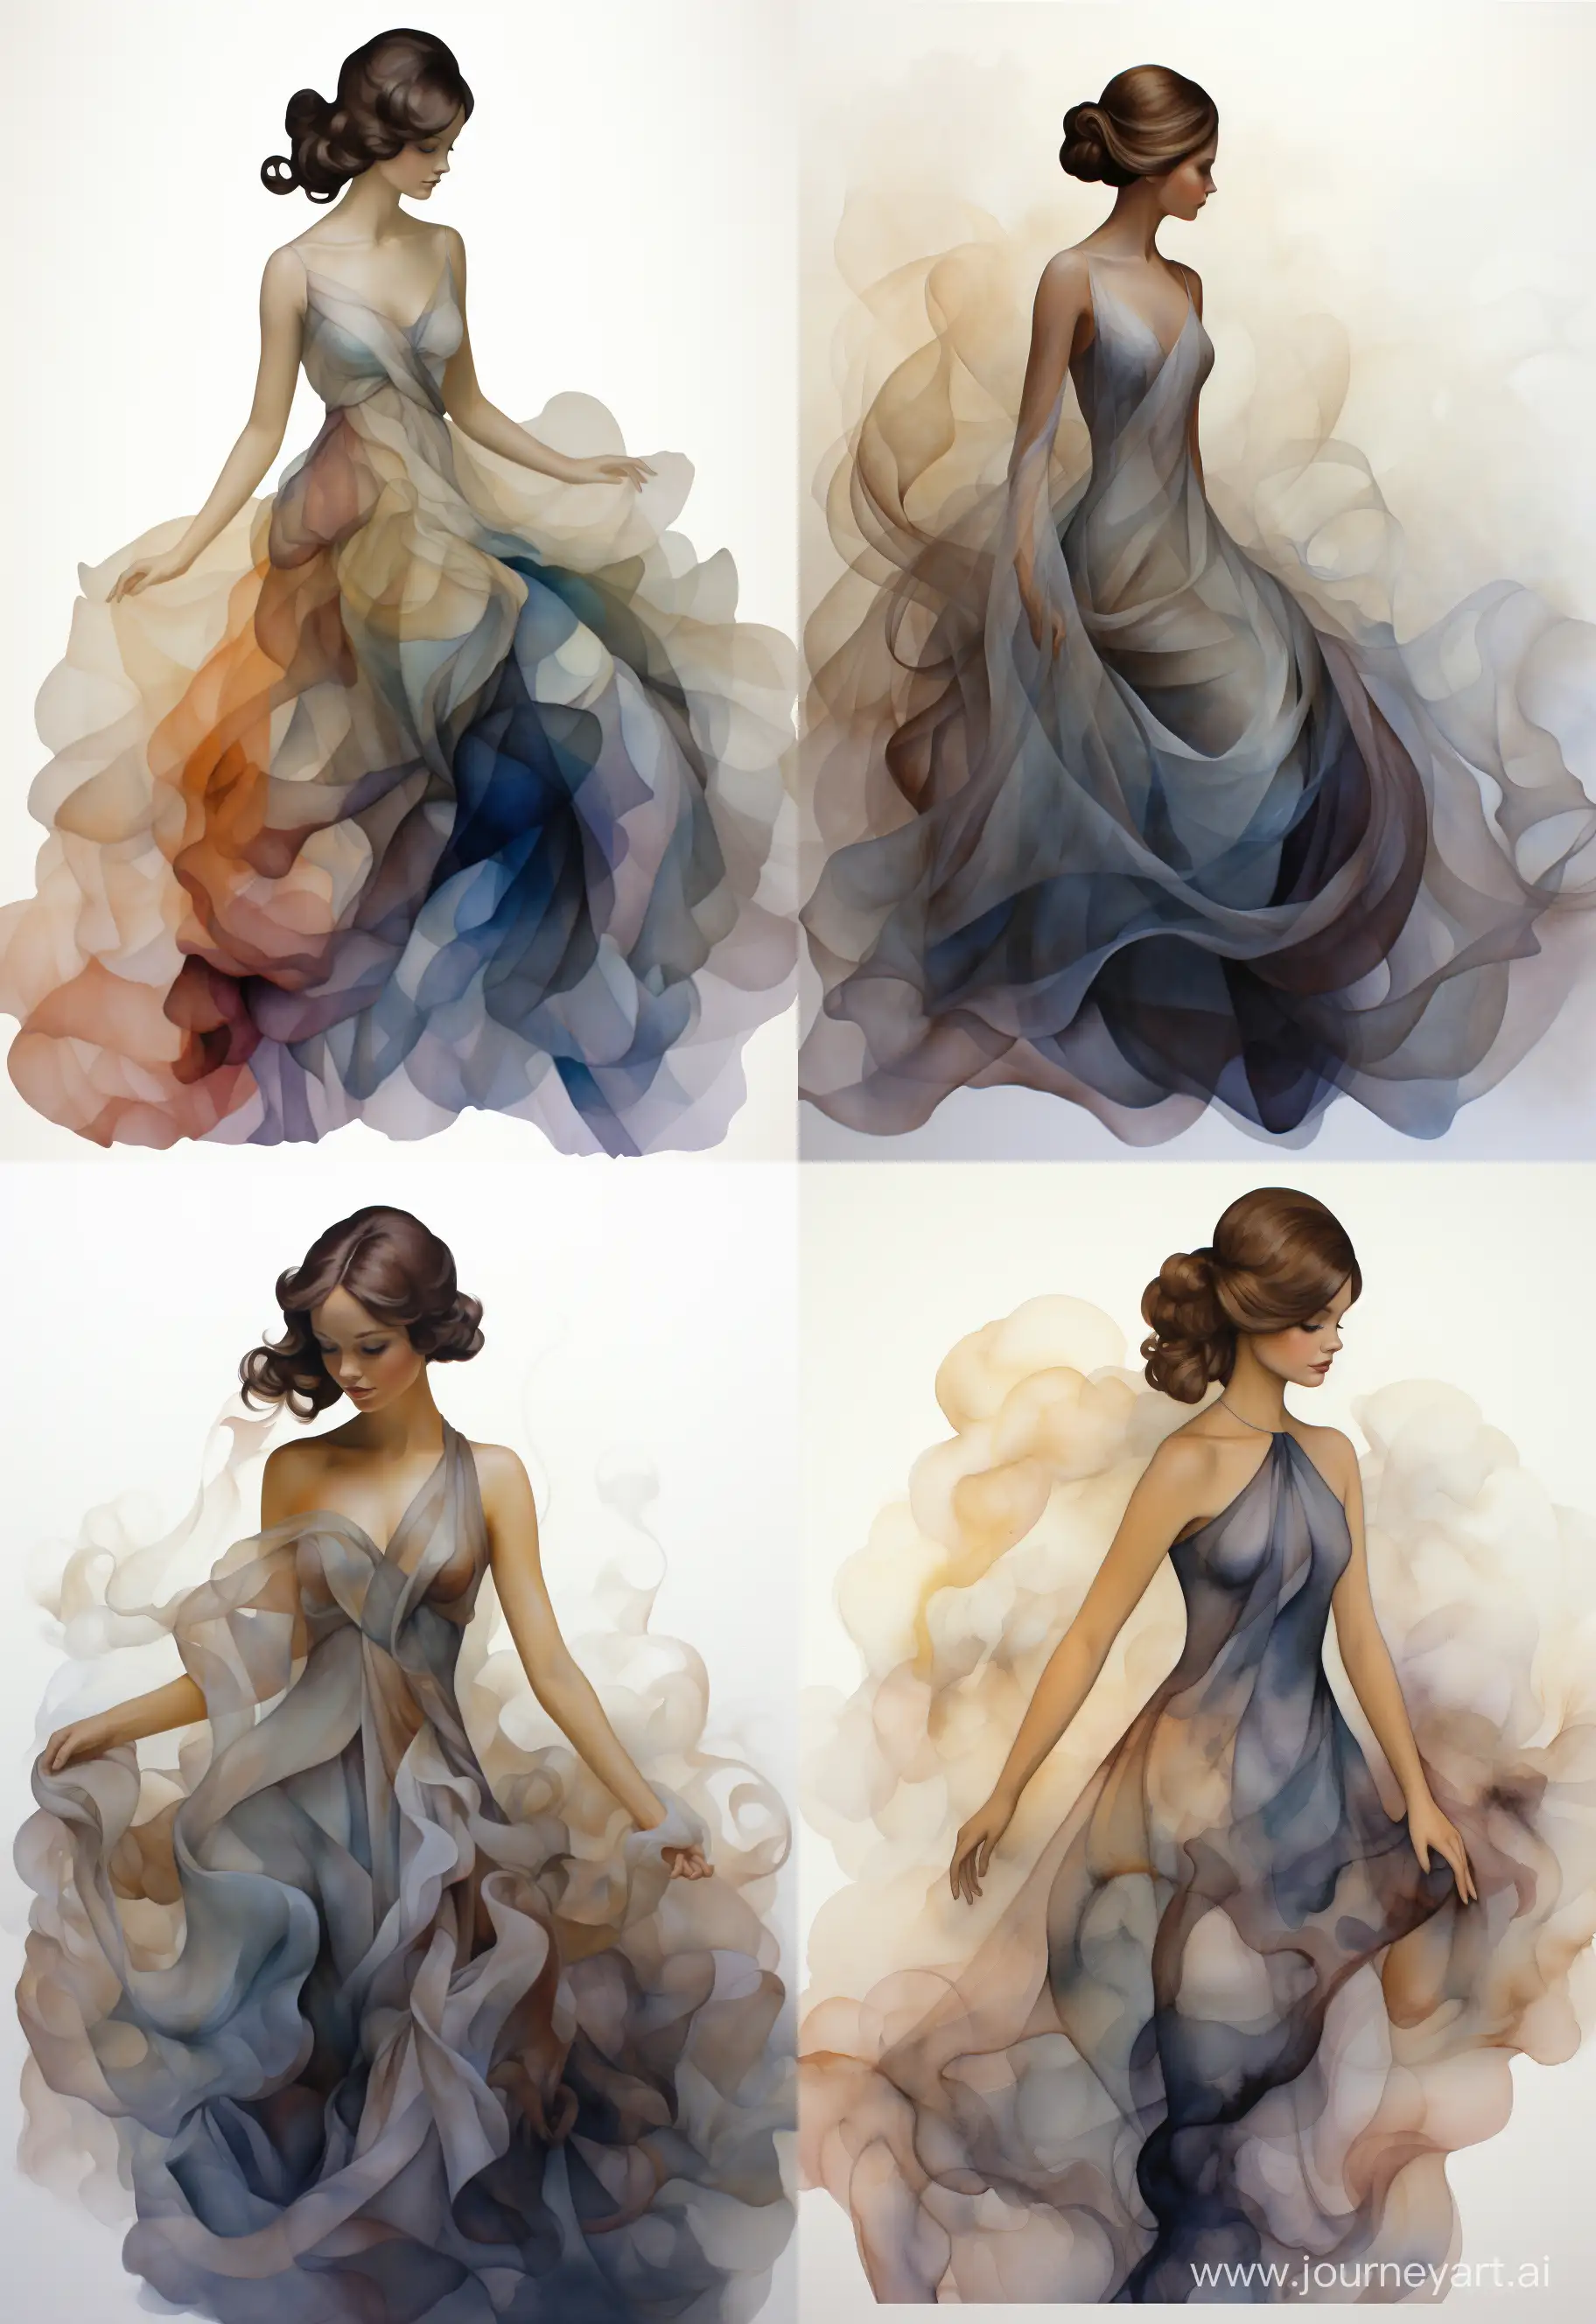 Ethereal-Pastel-Smoke-Sculpture-Captivating-Portrait-of-a-Woman-in-Flowing-Fabrics-and-Delicate-Ink-Washes